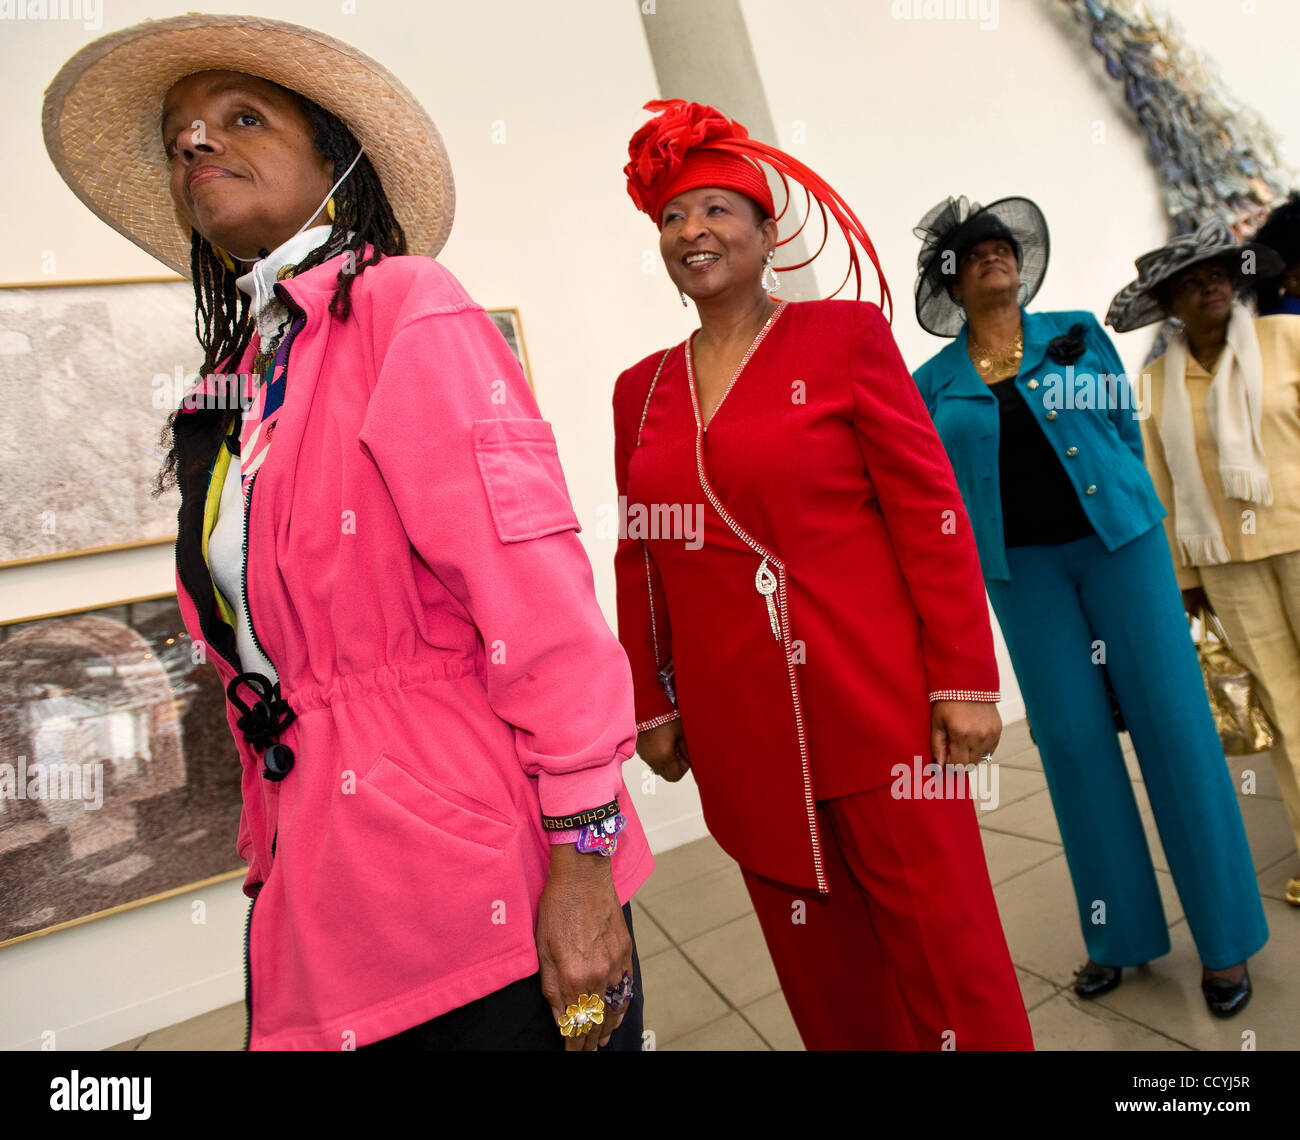 April 4, 2010 - Los Angeles, California, USA - Fashion-conscious visitors  to the California African American Museum